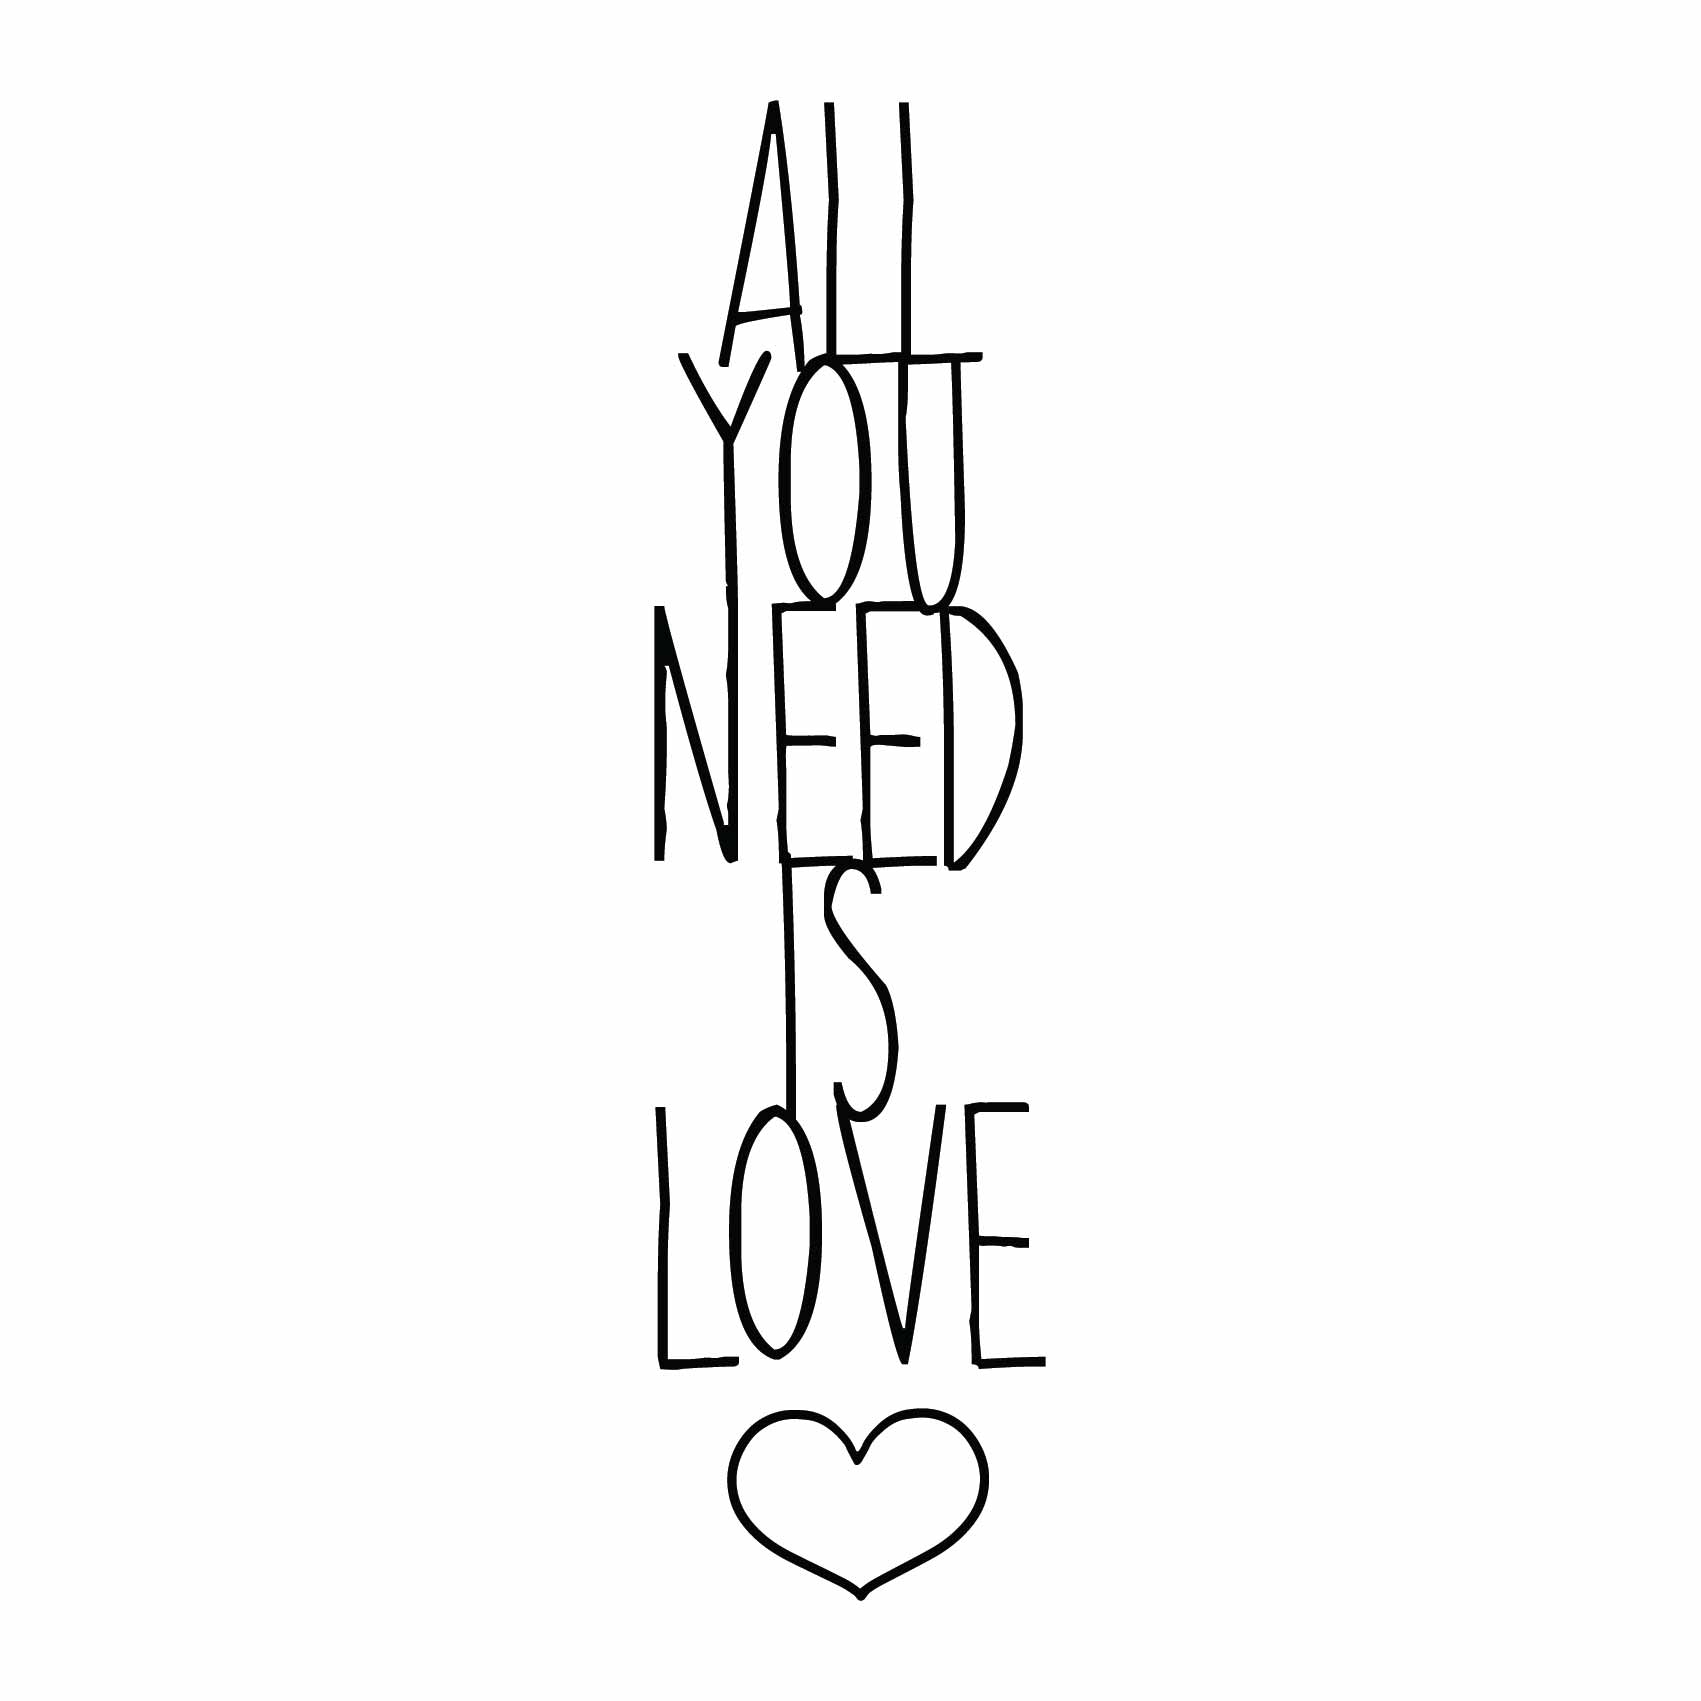 stickers-all-you-need-is-love-ref11amour-stickers-muraux-amour-autocollant-deco-chambre-salon-cuisine-sticker-mural-love-(2)